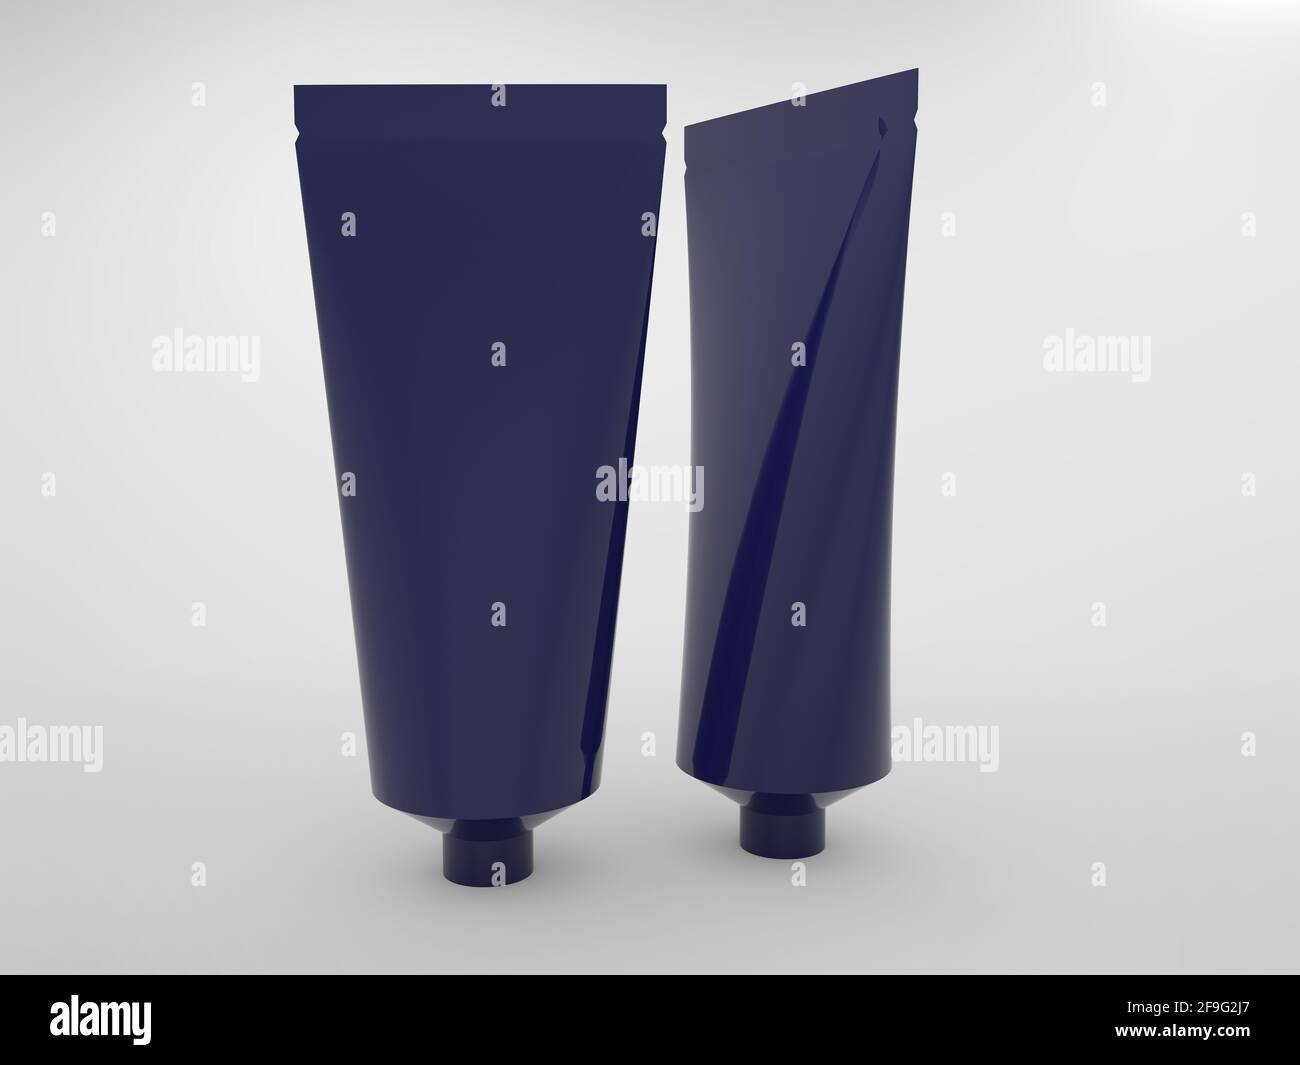 Product Packaging Template Stock Photo Alamy